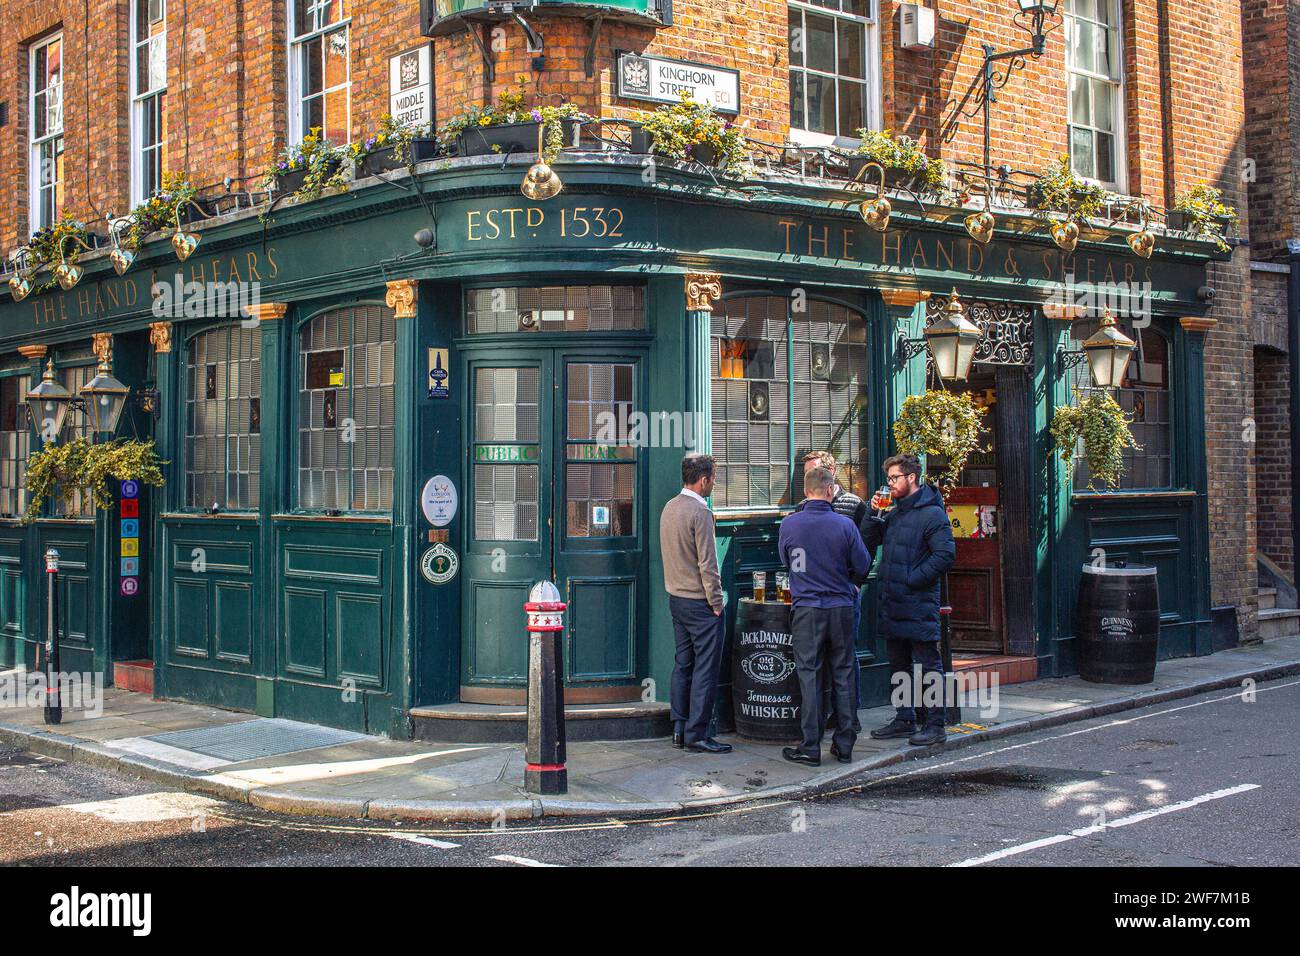 Peopel drinking outside pub The Hand and Shears in London ,United Kingdom Stock Photo